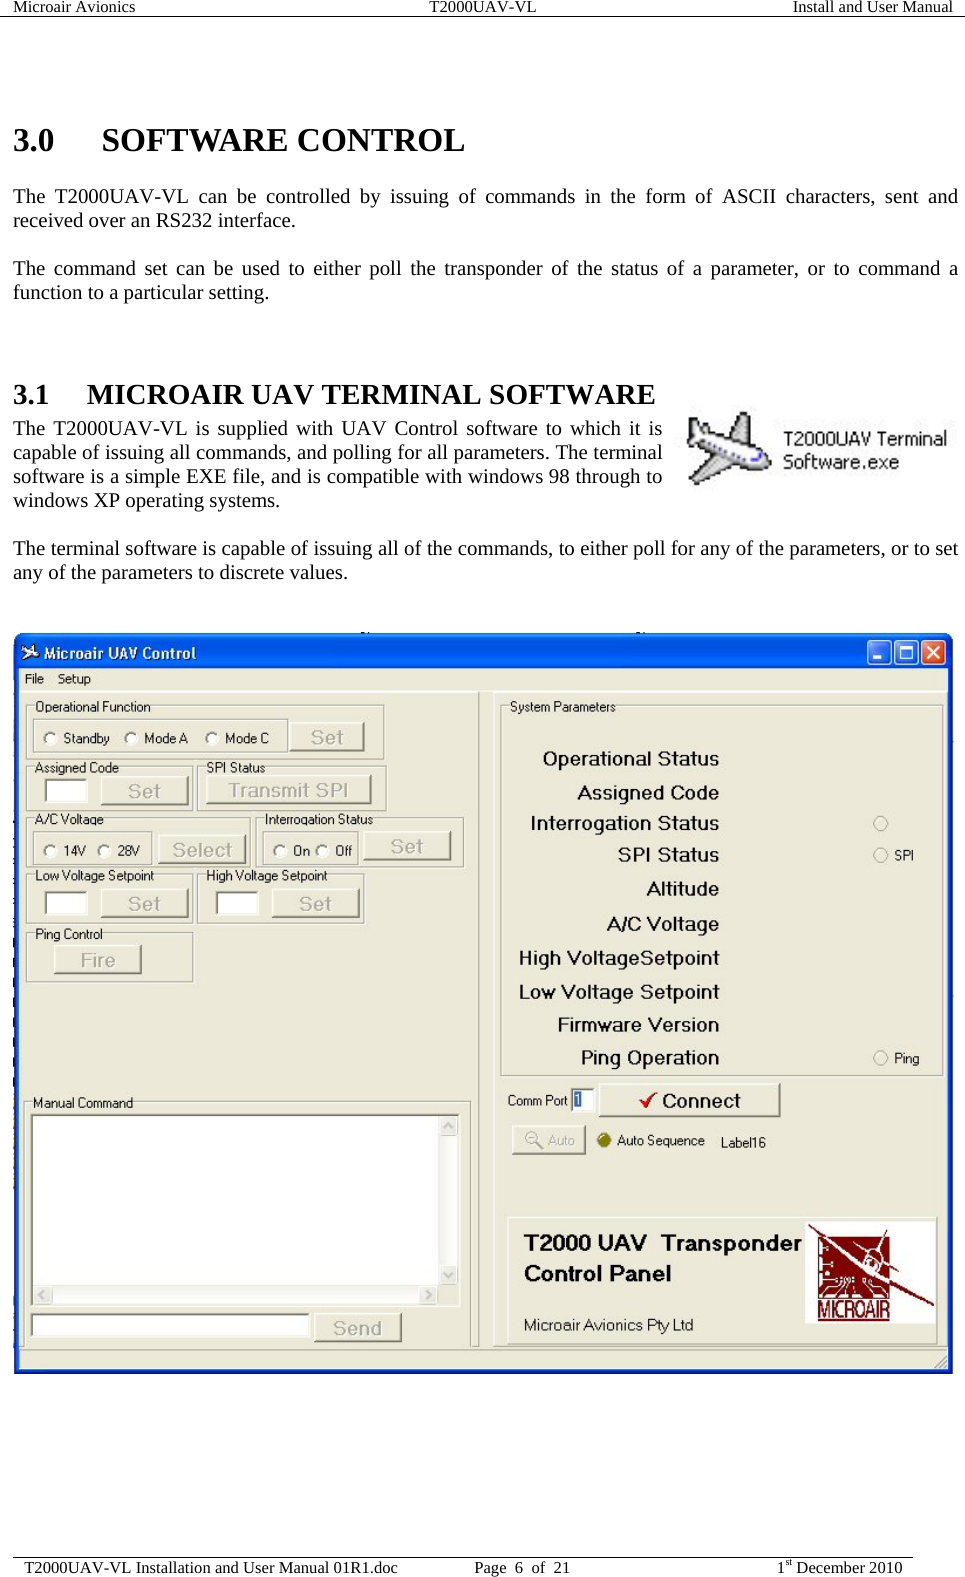 Microair Avionics  T2000UAV-VL  Install and User Manual  T2000UAV-VL Installation and User Manual 01R1.doc  Page  6  of  21  1st December 2010   3.0 SOFTWARE CONTROL The T2000UAV-VL can be controlled by issuing of commands in the form of ASCII characters, sent and received over an RS232 interface.  The command set can be used to either poll the transponder of the status of a parameter, or to command a function to a particular setting.   3.1 MICROAIR UAV TERMINAL SOFTWARE The T2000UAV-VL is supplied with UAV Control software to which it is capable of issuing all commands, and polling for all parameters. The terminal software is a simple EXE file, and is compatible with windows 98 through to windows XP operating systems.  The terminal software is capable of issuing all of the commands, to either poll for any of the parameters, or to set any of the parameters to discrete values.     